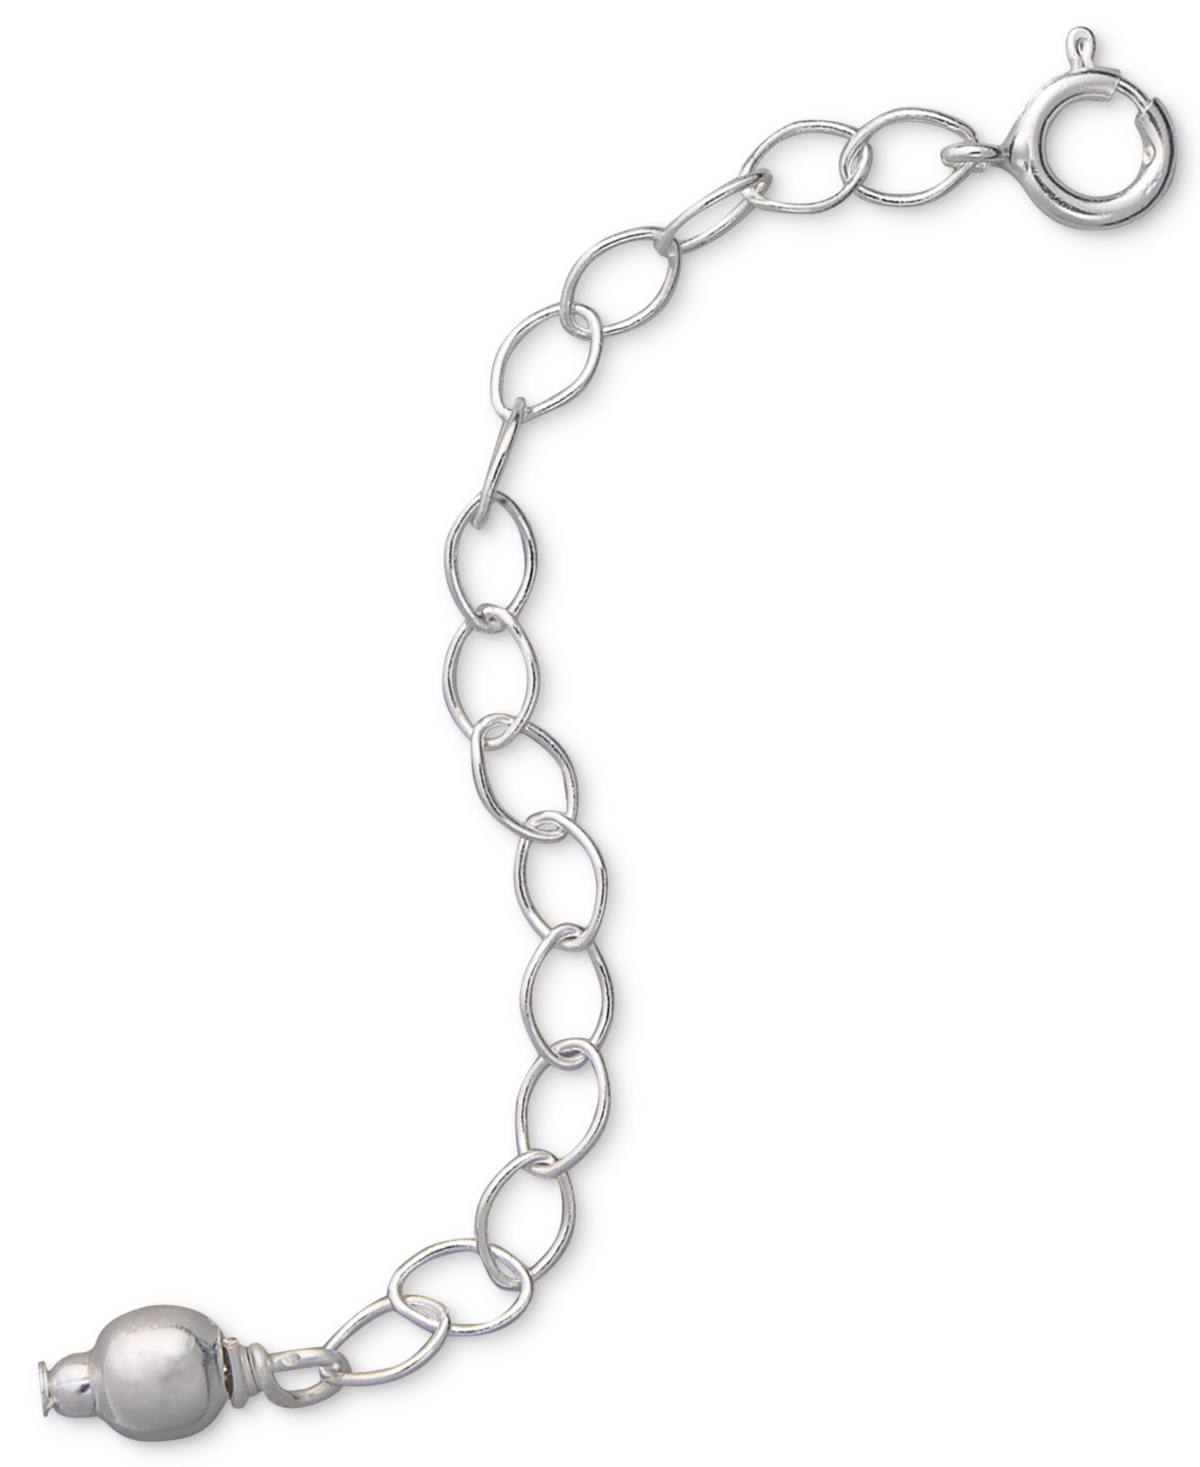 Giani Bernini 18k Gold over Sterling Silver Extension Chain Necklace, 2 Inch Chain Extender